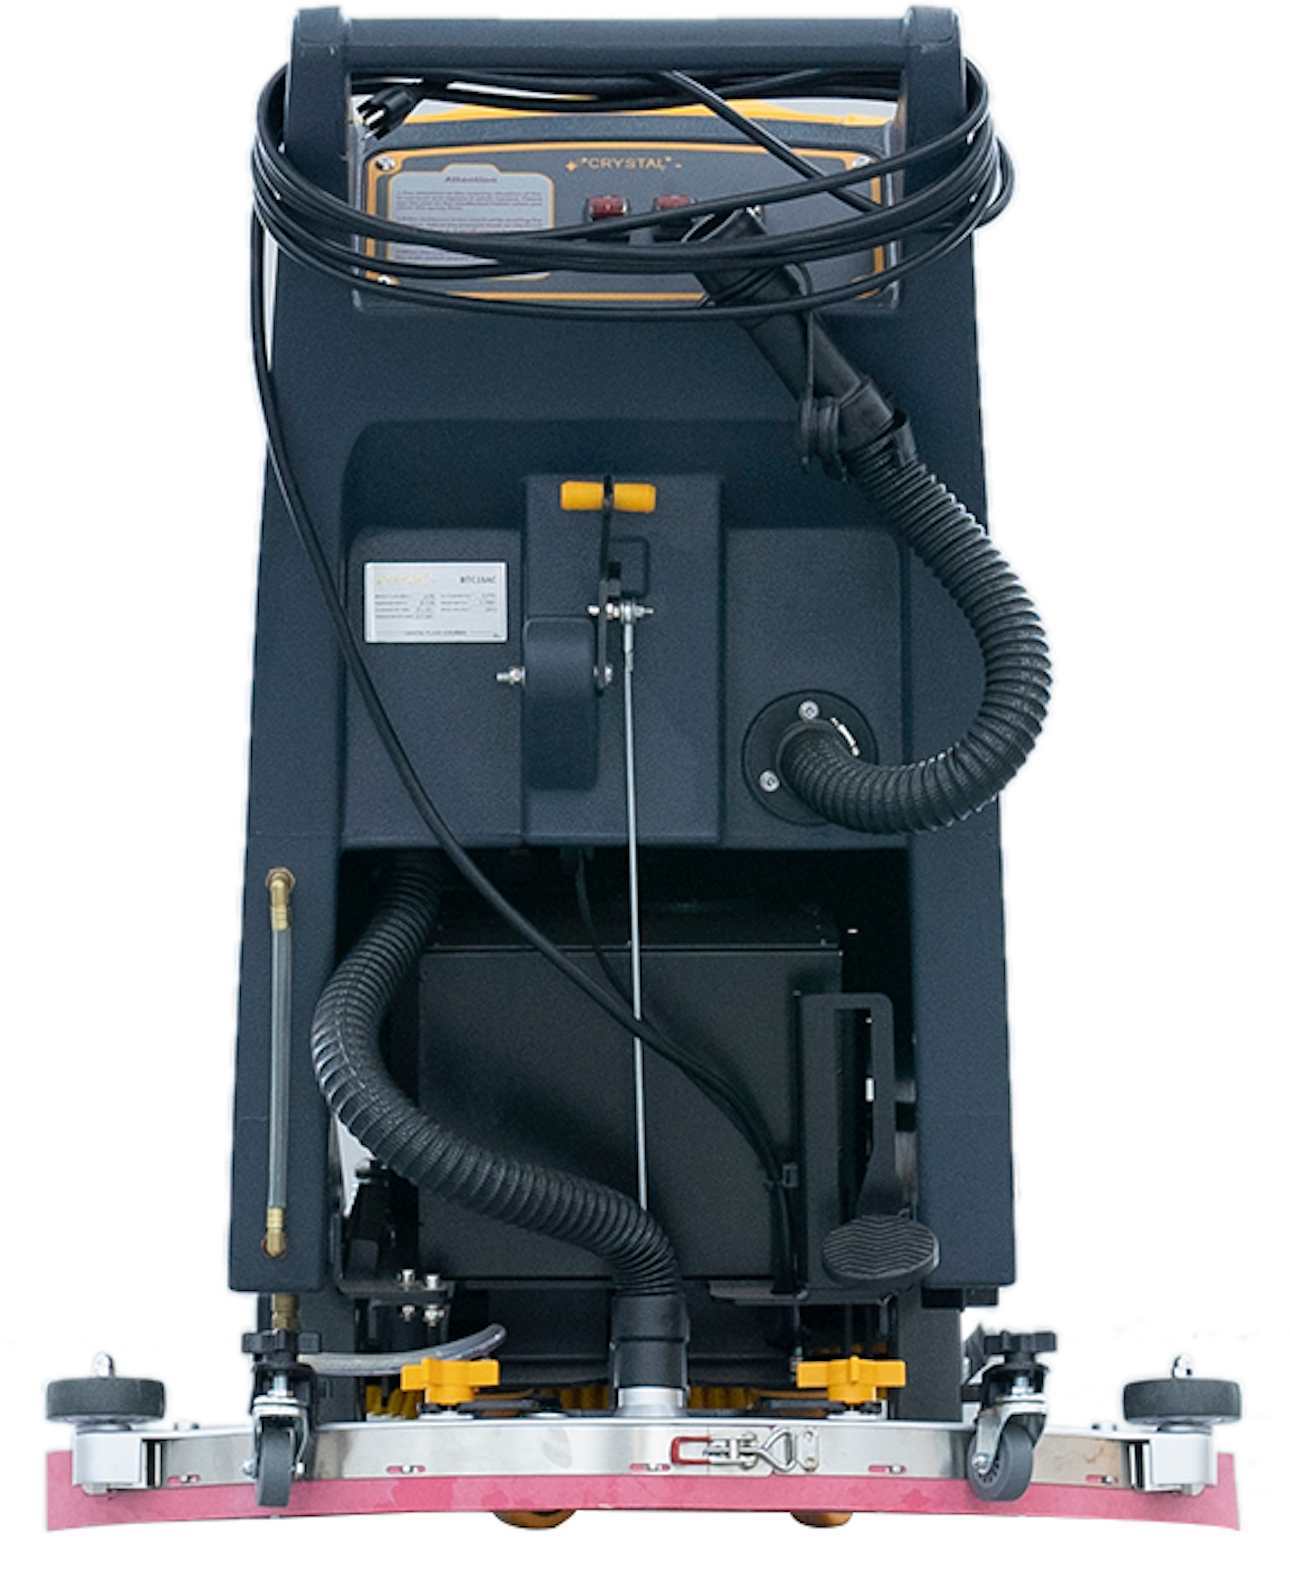 18" 15 Gal Corded Auto Floor Scrubber with a Complete Set of Parts, BTC18AC